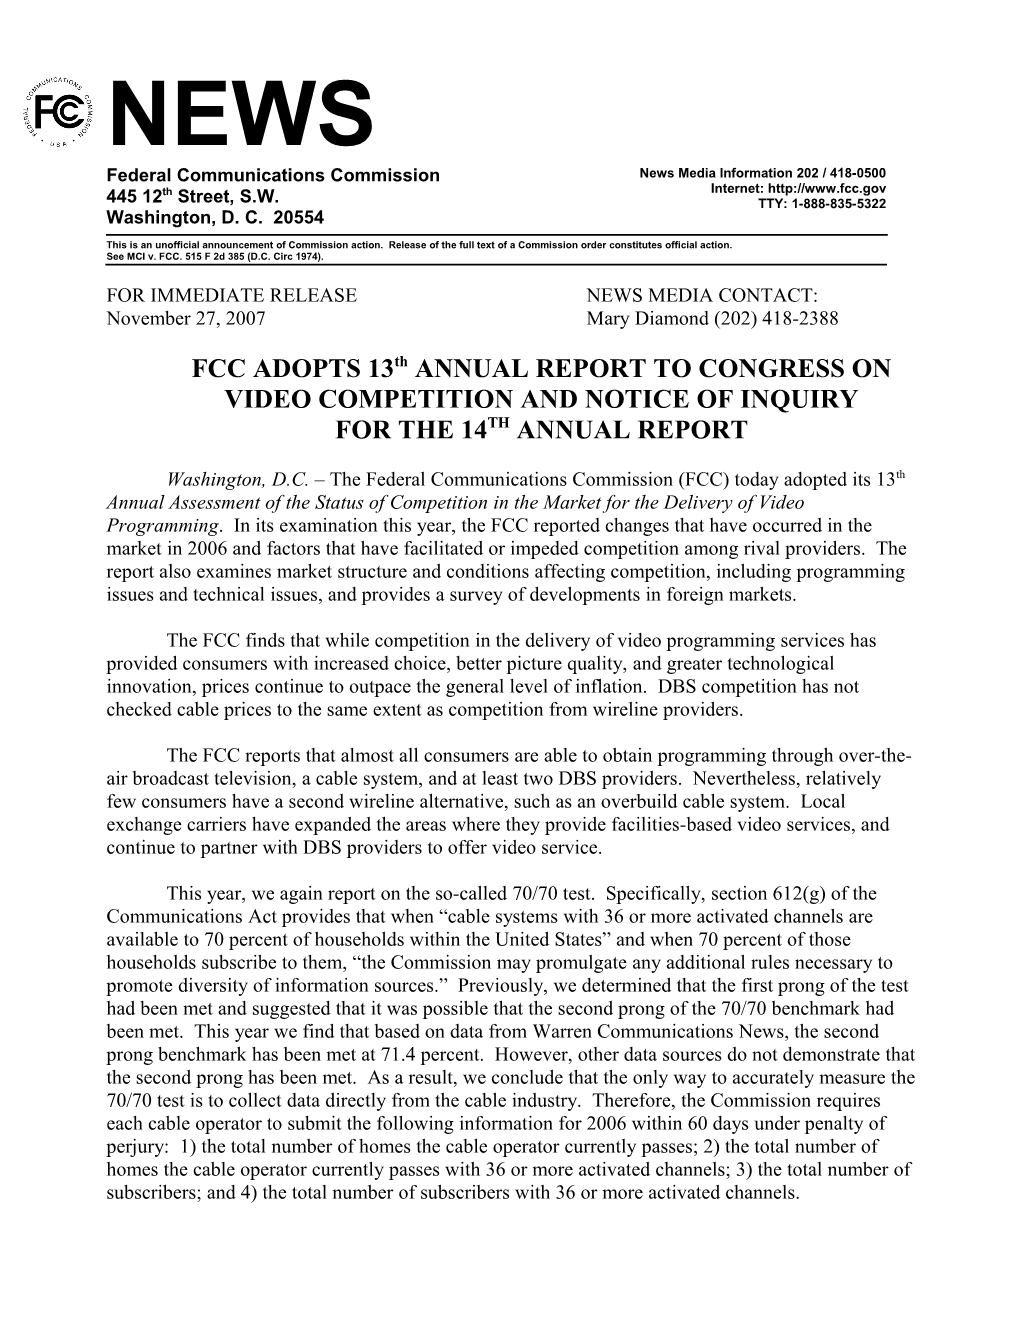 FCC ADOPTS 13Thannual REPORT to CONGRESS ON